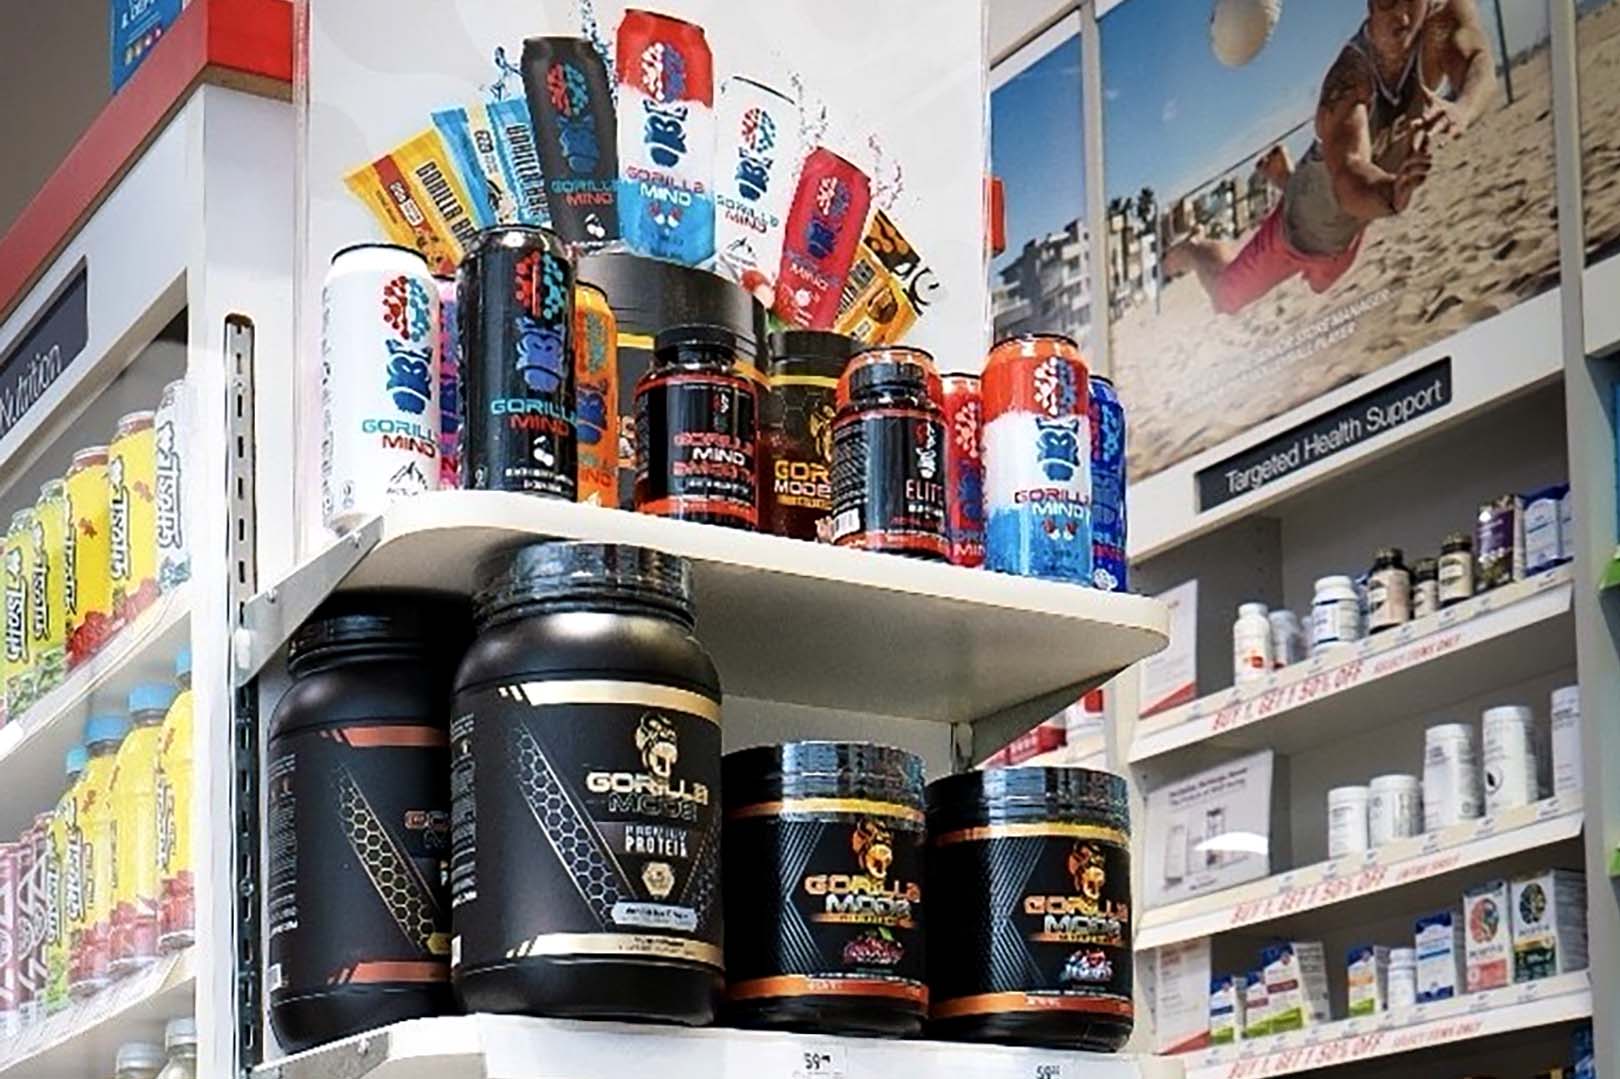 Gorilla Mind Adds Supplements To Its Gnc Lineup